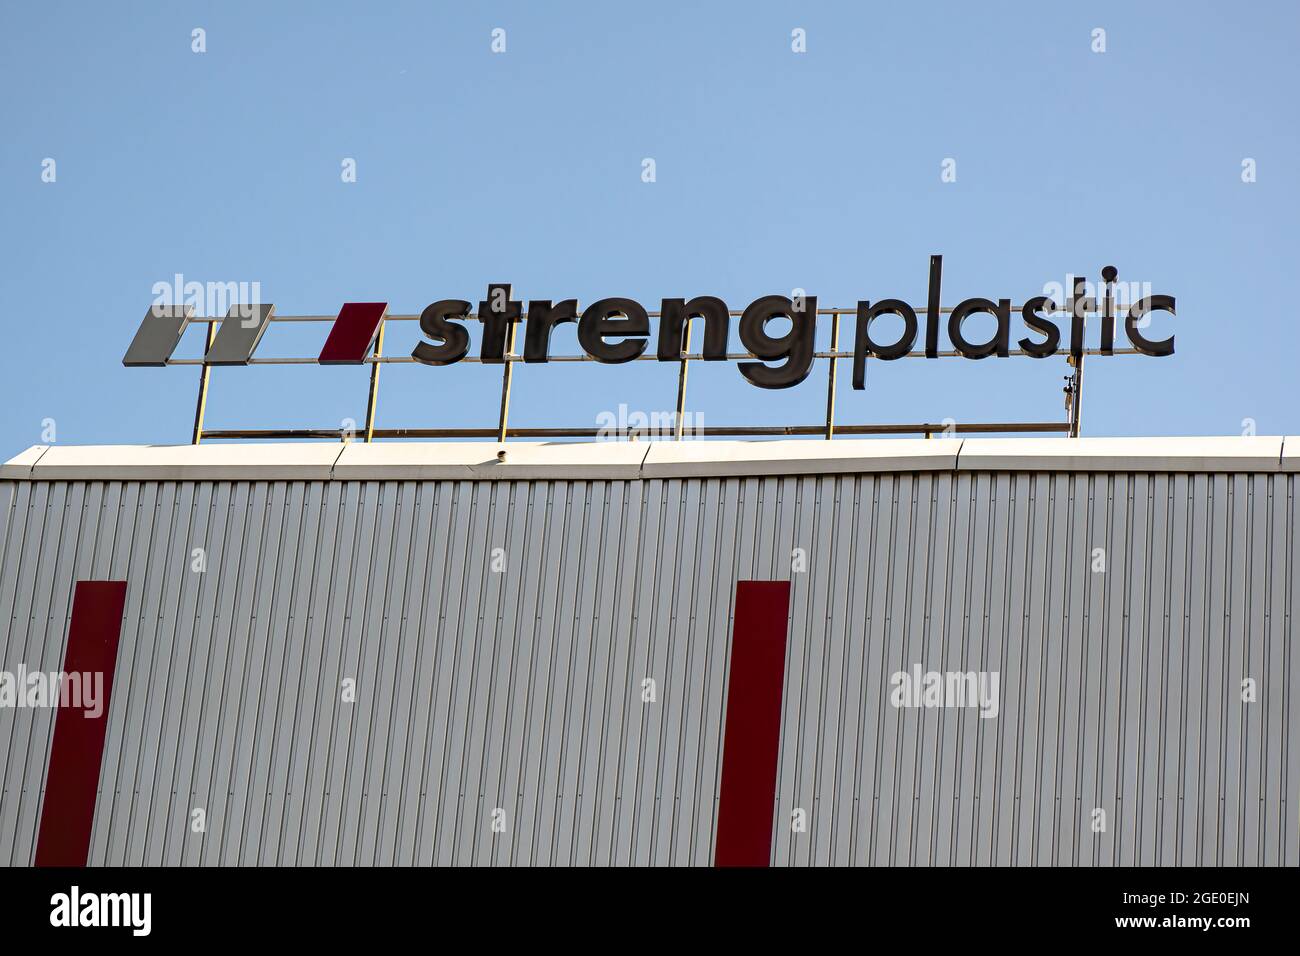 DIELSDORF, SWITZERLAND - APRIL 27, 2020: Streng Plastic is a supplier in the plastic pipe system industry and offers sewage, pressure and cable protec Stock Photo